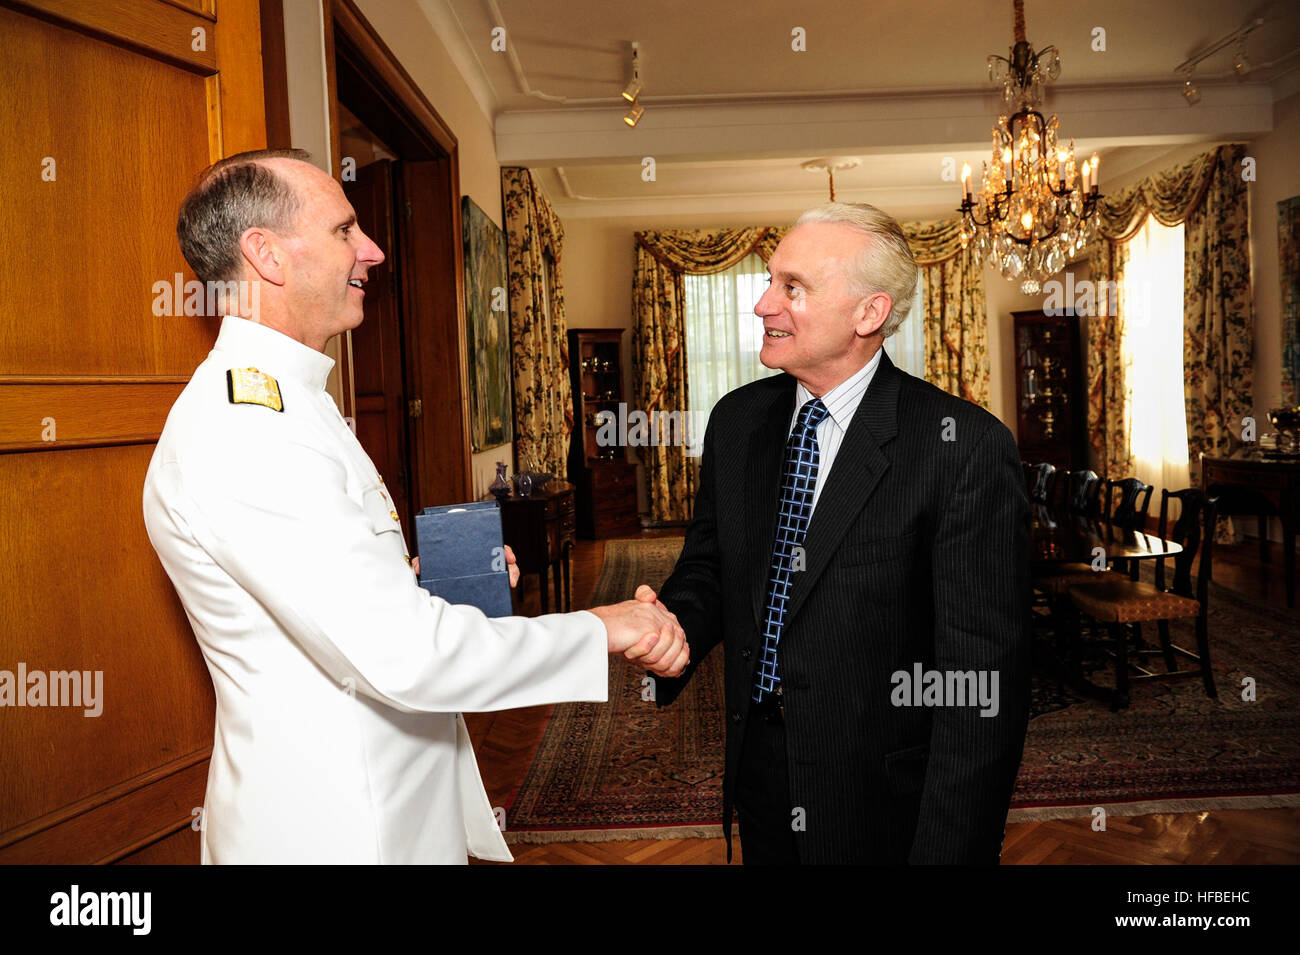 120620-N-WL435-005  ANKARA, Turkey (June 20, 2012) Chief of Naval Operations (CNO) Adm. Jonathan Greenert, left, meets with the U.S. Ambassador to Turkey, Ambassador Francis J. Ricciardone, Jr. while in Turkey to talk with state and military leaders about current and future cooperative efforts. (U.S. Navy photo by Mass Communication Specialist 1st Class Peter D. Lawlor/Released)  - Official U.S. Navy Imagery - 120620-N-WL435-005 Stock Photo